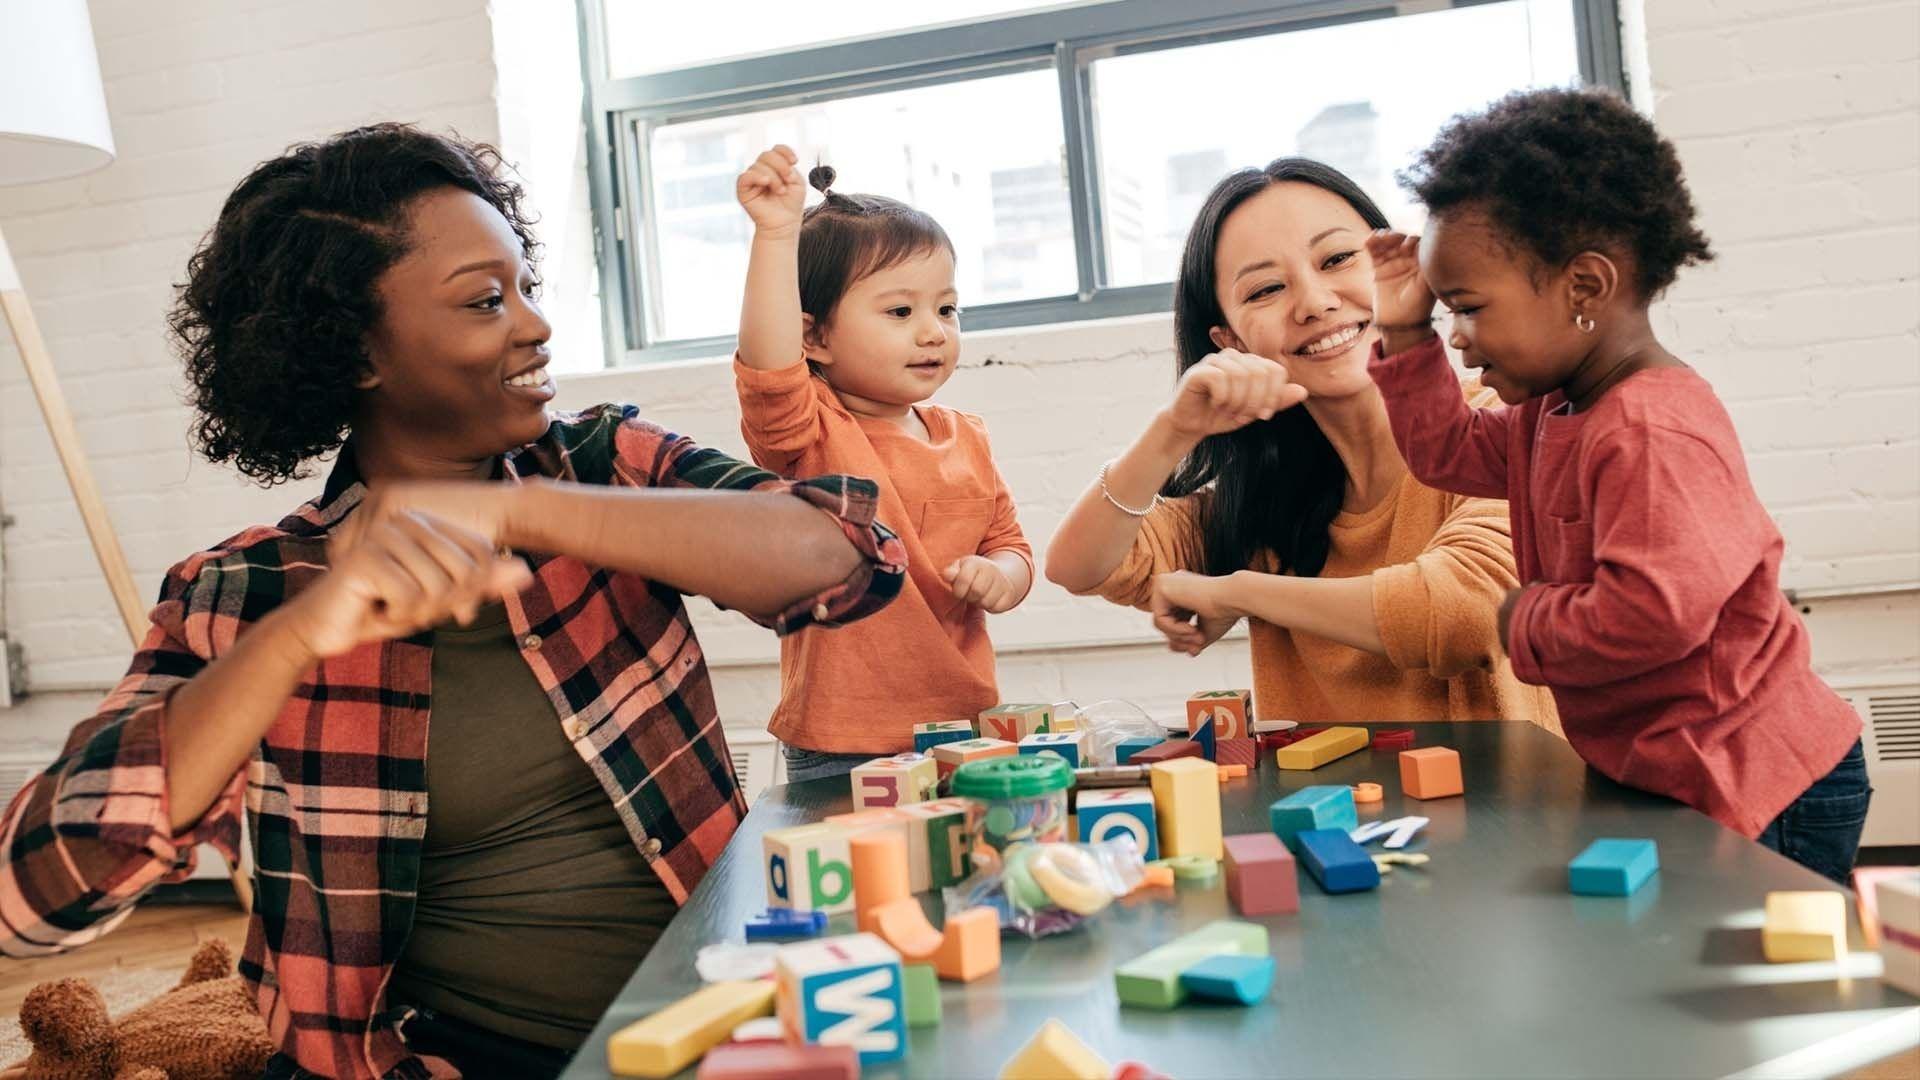 Two moms and their two children play with blocks at a table.